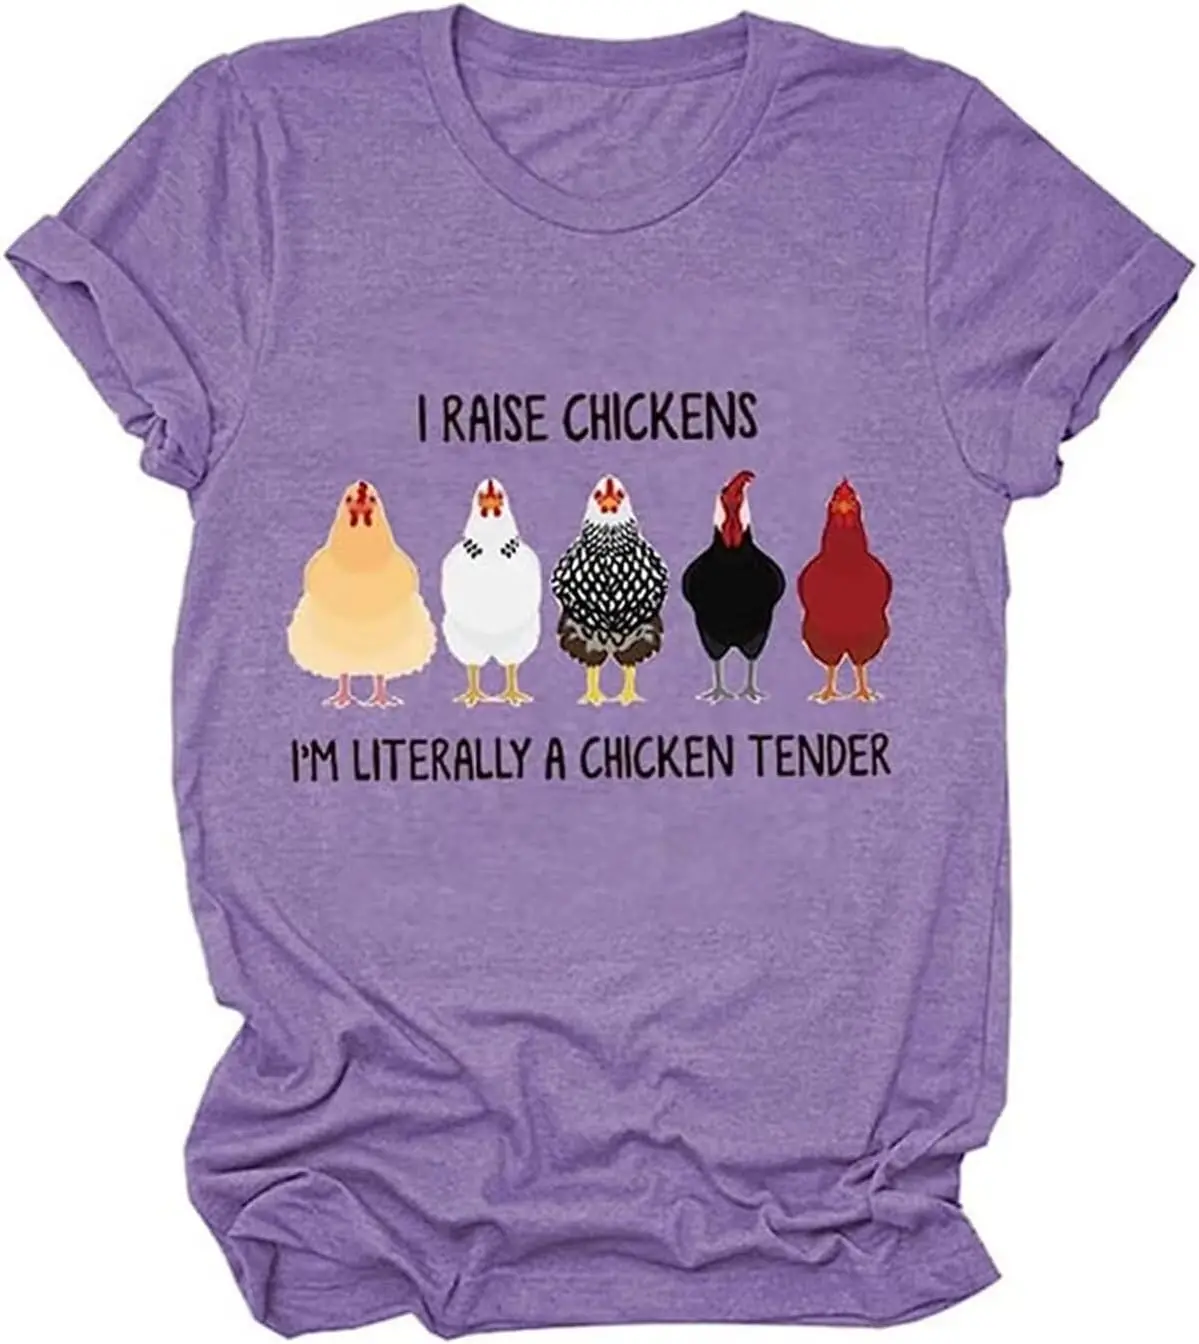 

I Raise Chickens Farm Shirts for Women Graphic T-Shirt Women's Printed Cute Chickens Shirt Casual Short Sleeve Tops